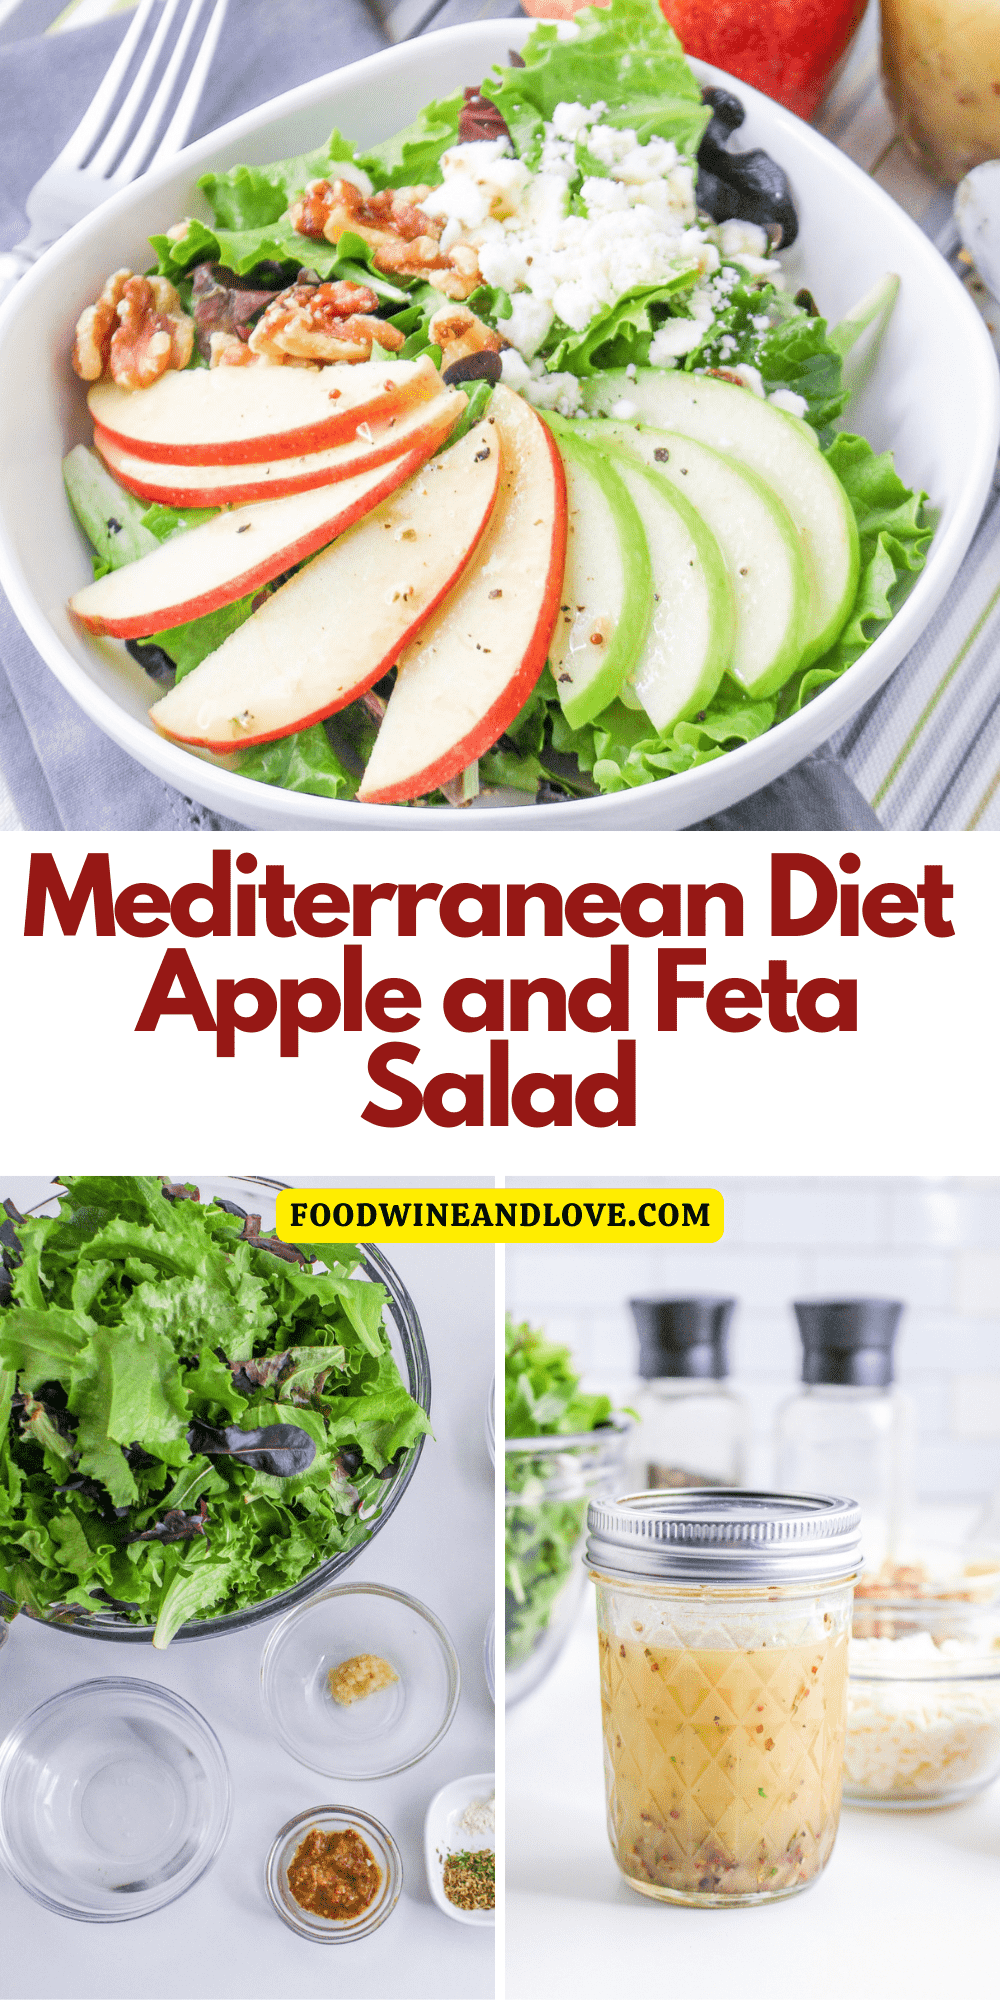 Mediterranean Diet Apple and Feta Salad, a simple and delicious lunch or side recipe made with healthy ingredients with homemade vinaigrette.